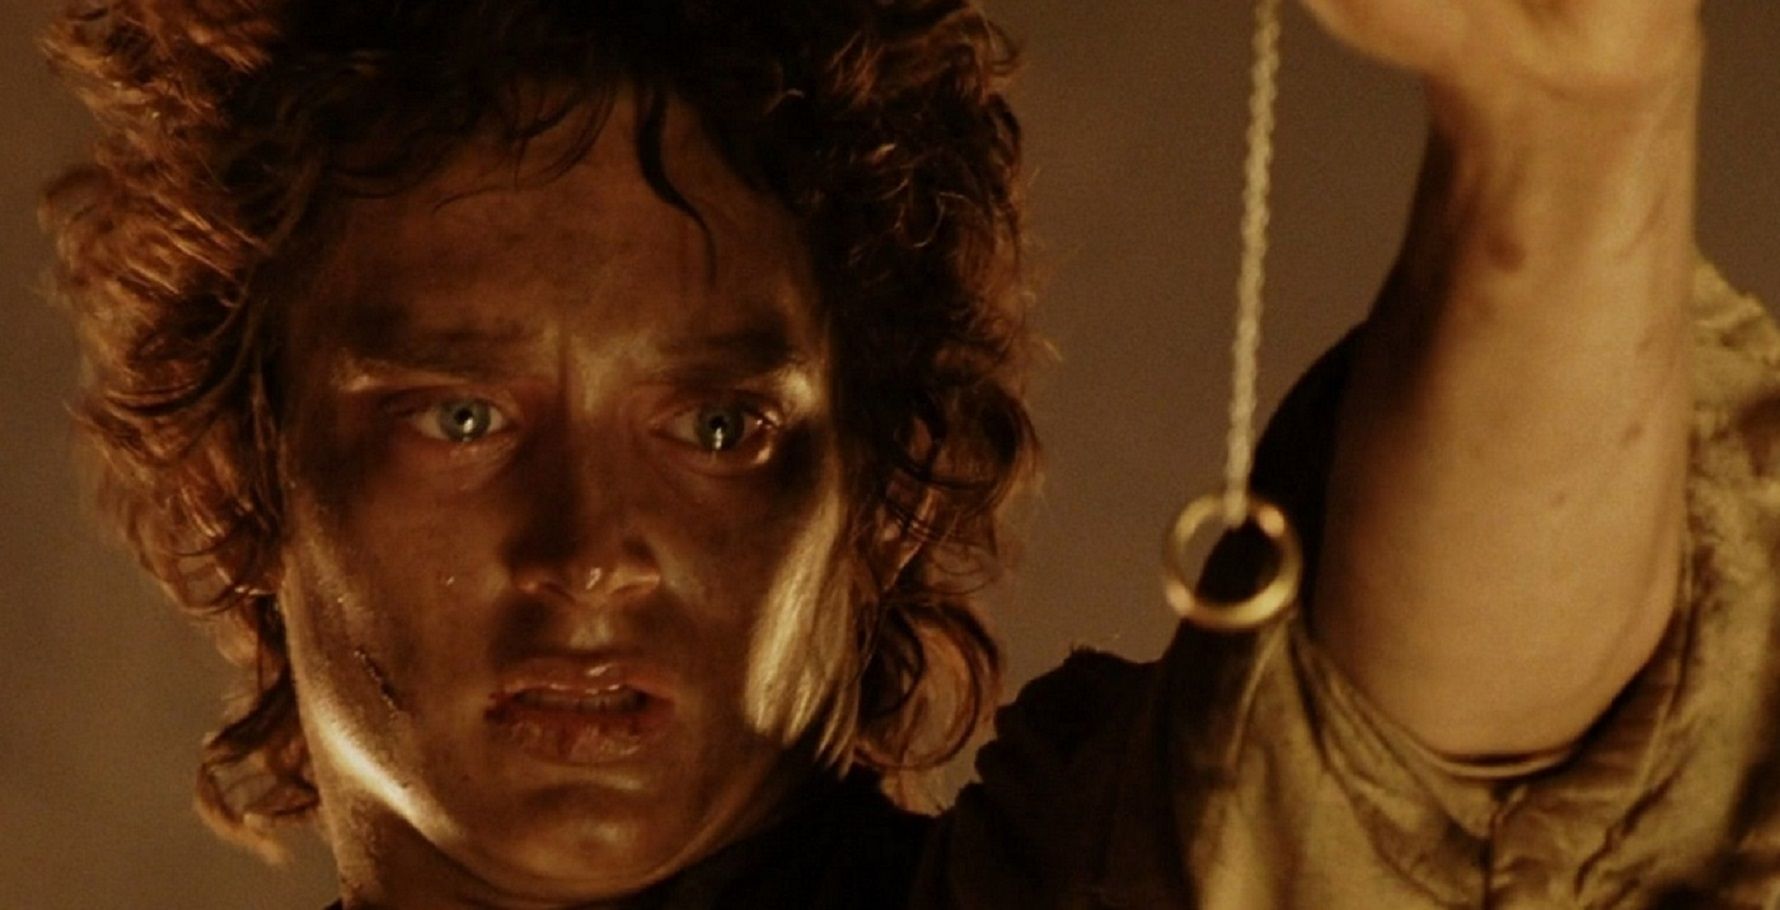 Image of Frodo holding up the ring on the cliff of the fire pit in Mount Doom. 